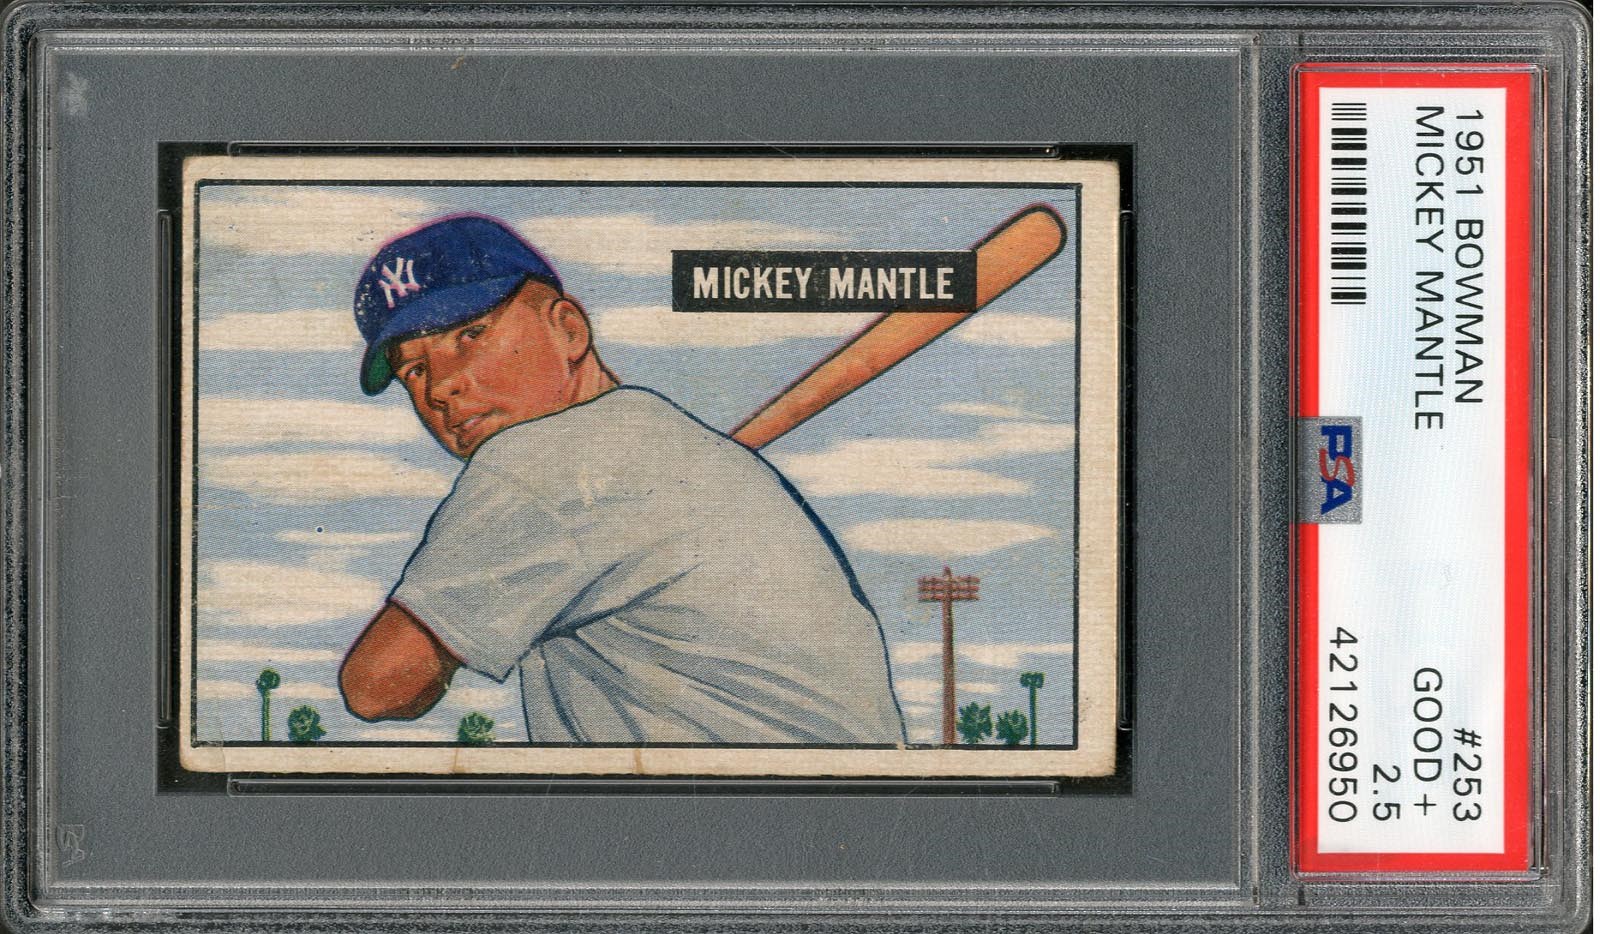 Baseball and Trading Cards - 1951 Bowman Mickey Mantle #253 Rookie (PSA Good+ 2.5)